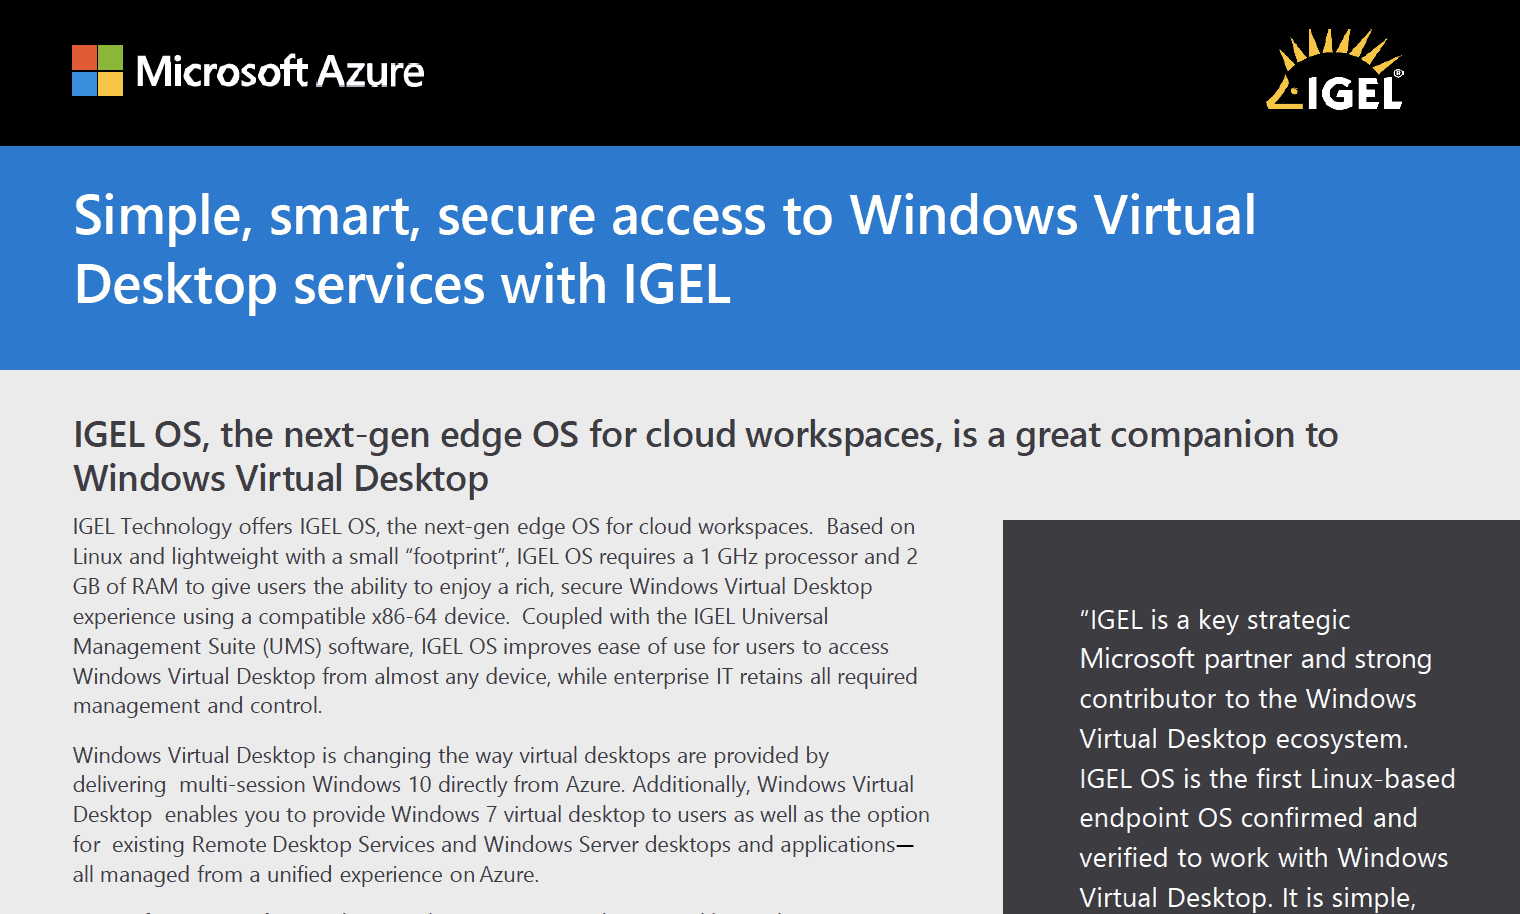 Simple, smart, secure access to Windows Virtual Desktop services with IGEL